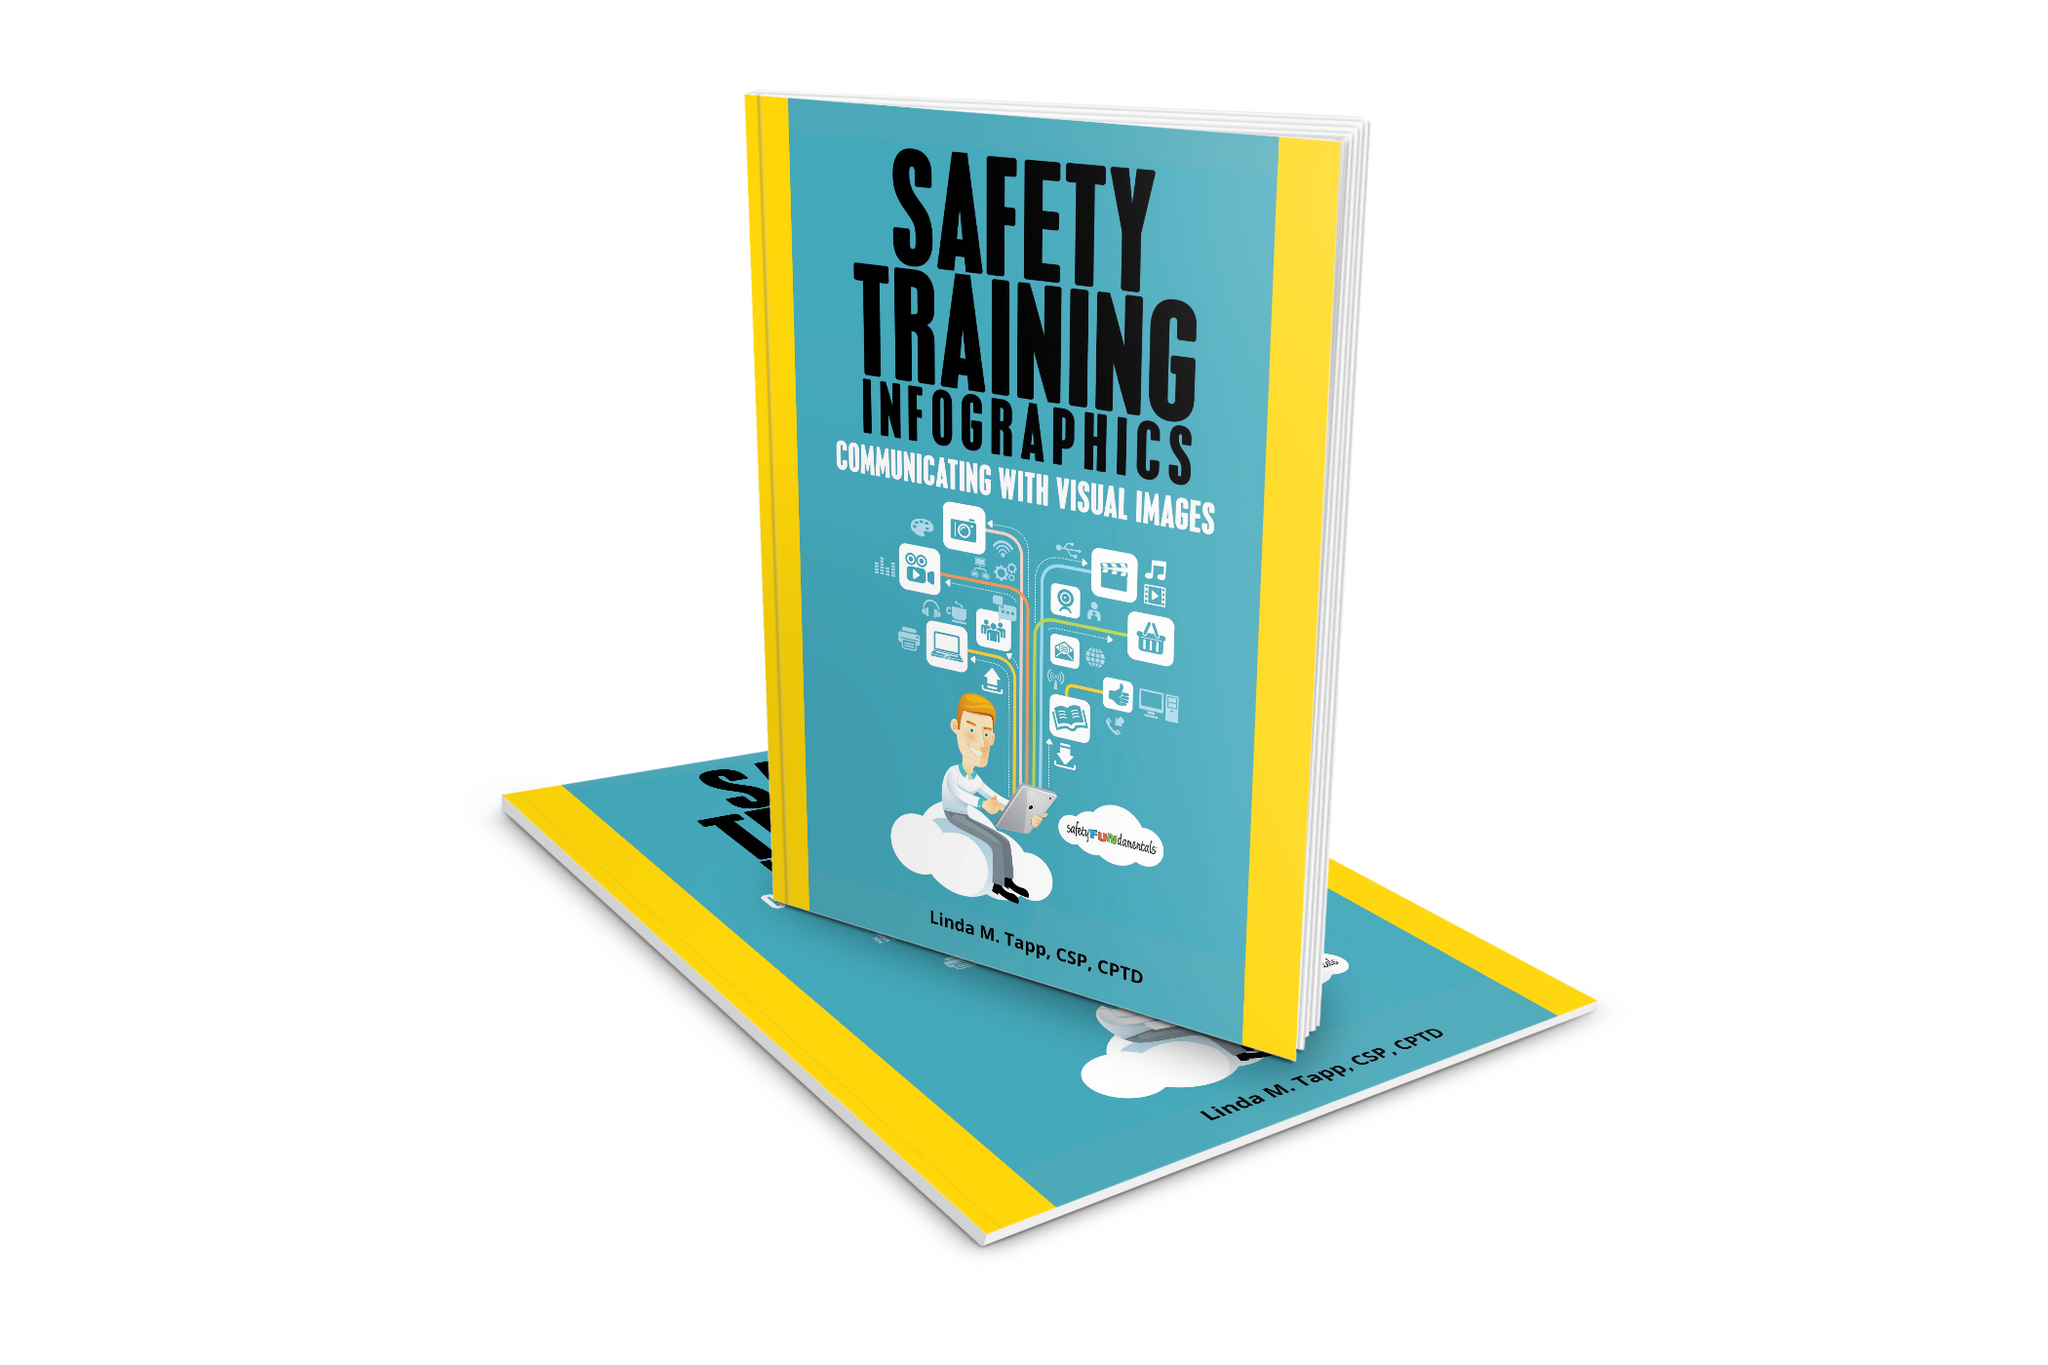 Safety Training Infographics: Creating with Visual Images (print)